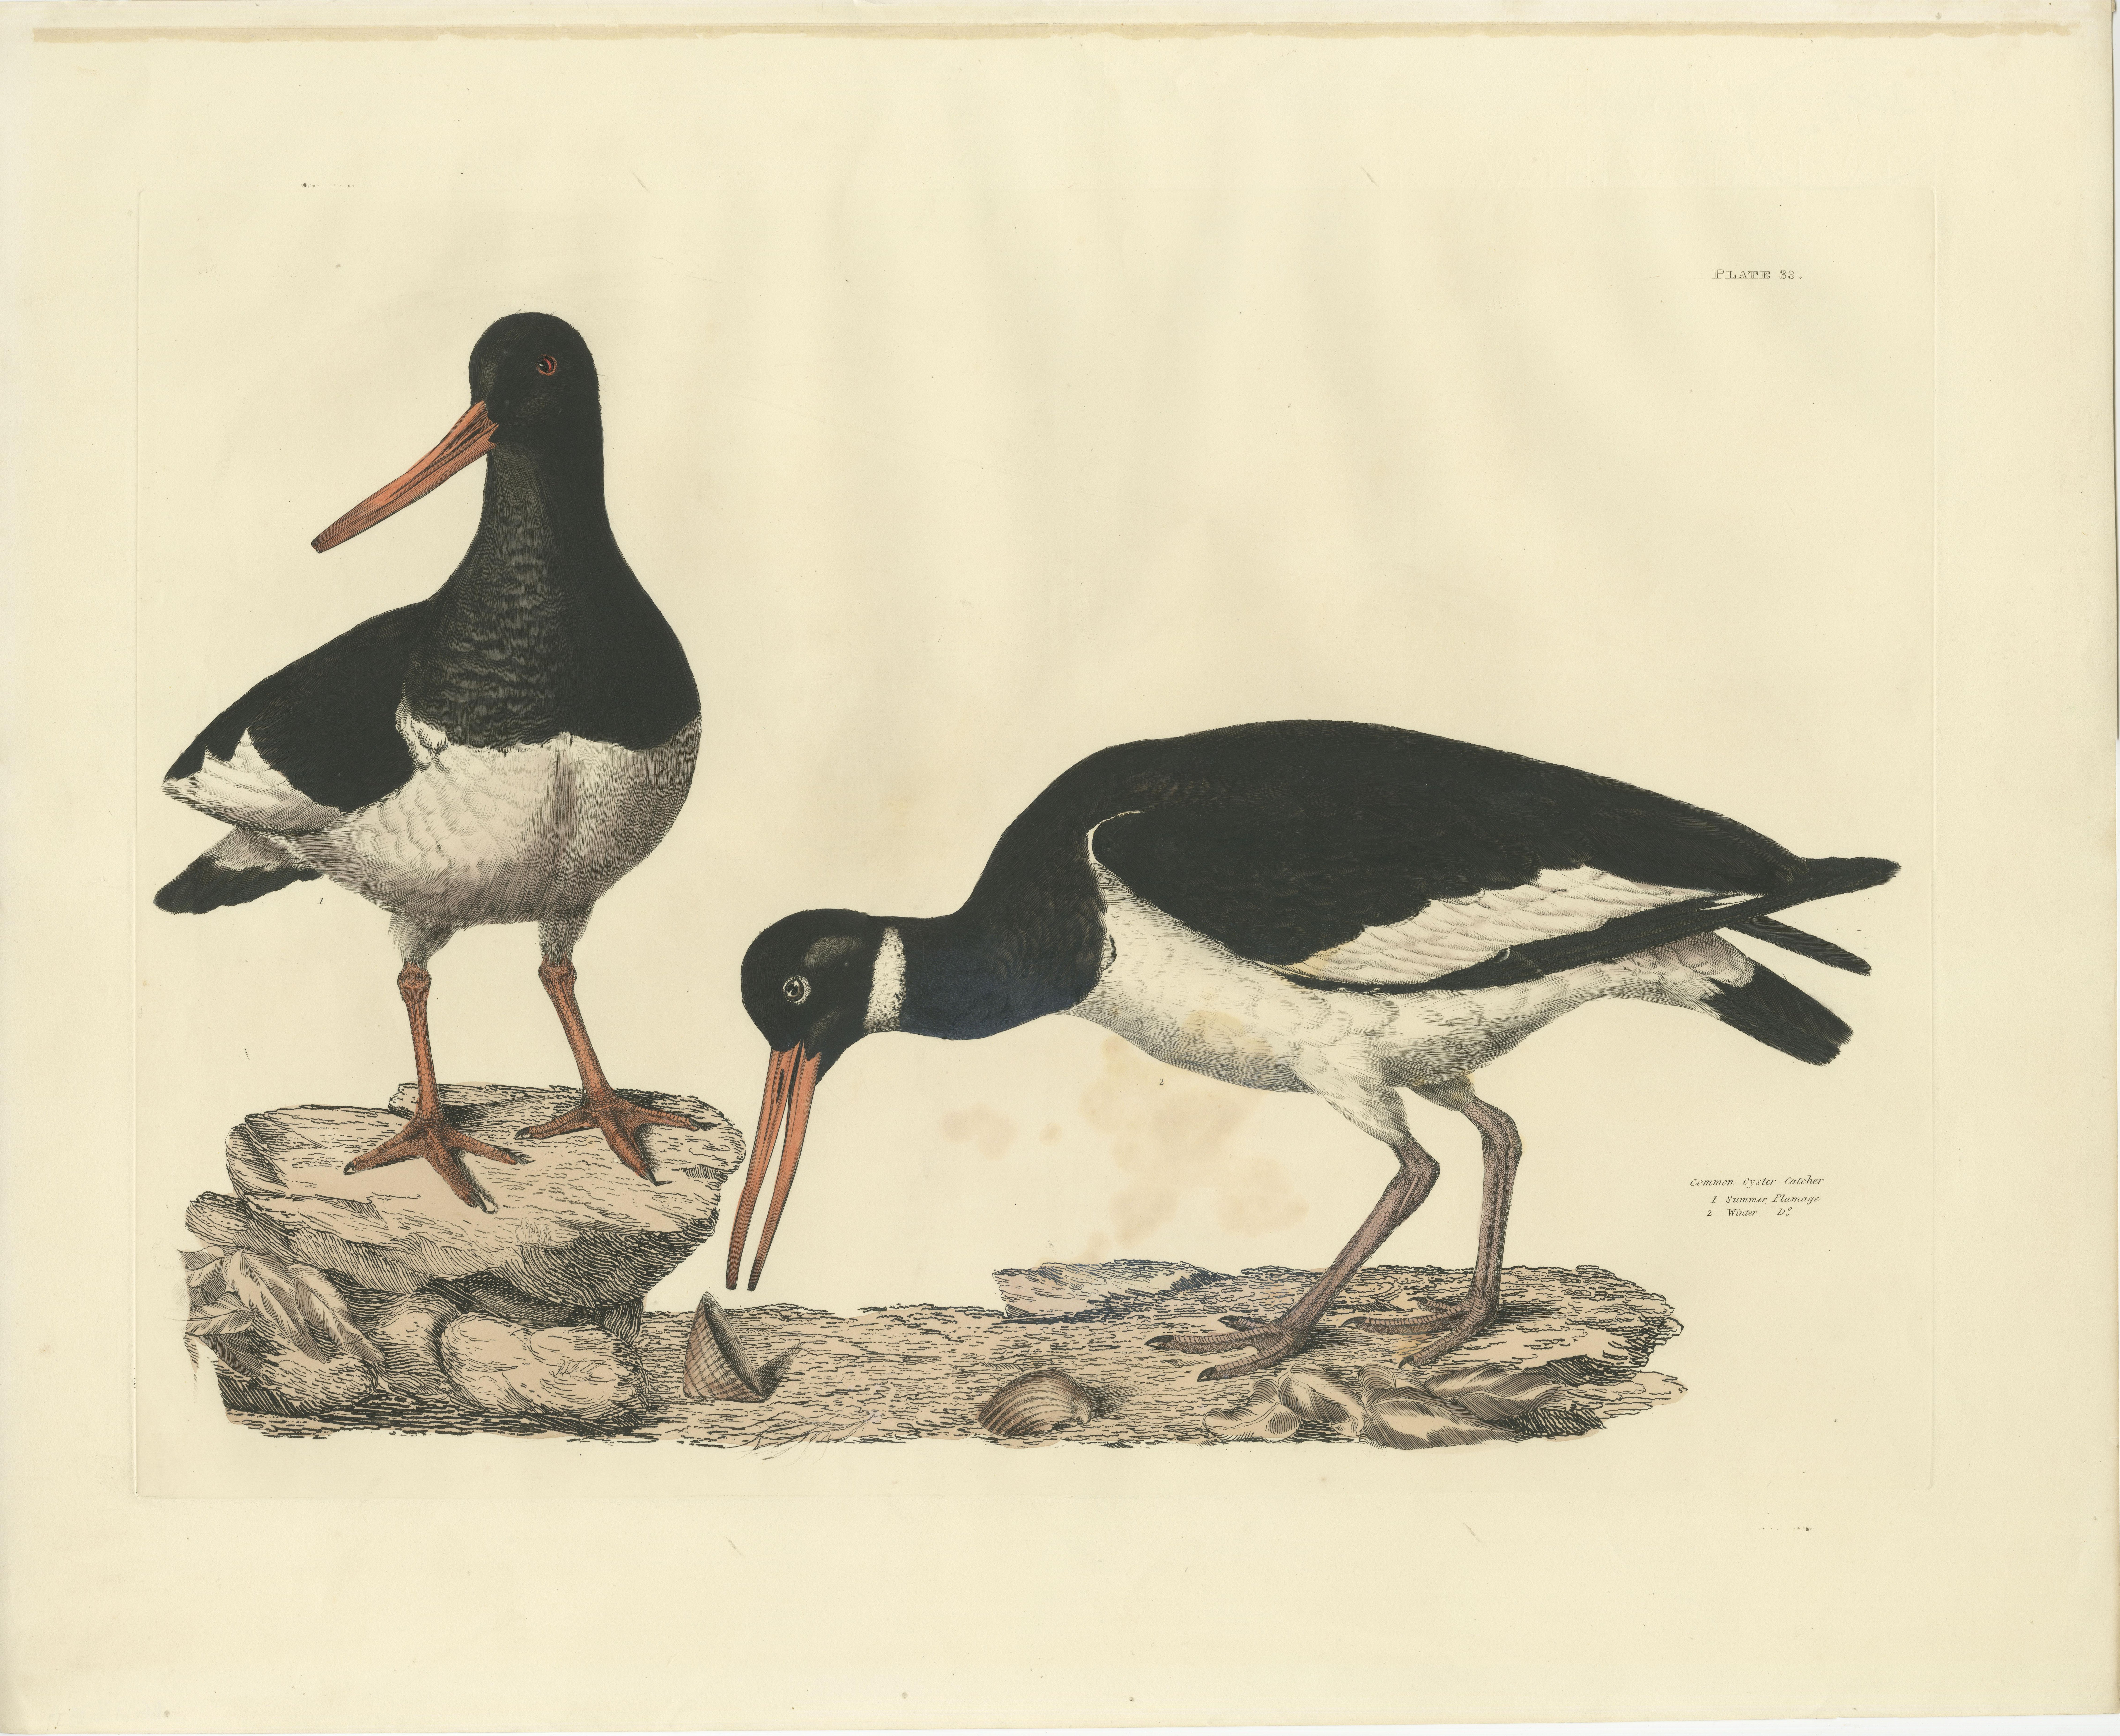 Large original hand-colored antique ornithological print made by Selby and published around 1826. 

This engraving is an exquisite print from Prideaux John Selby's 